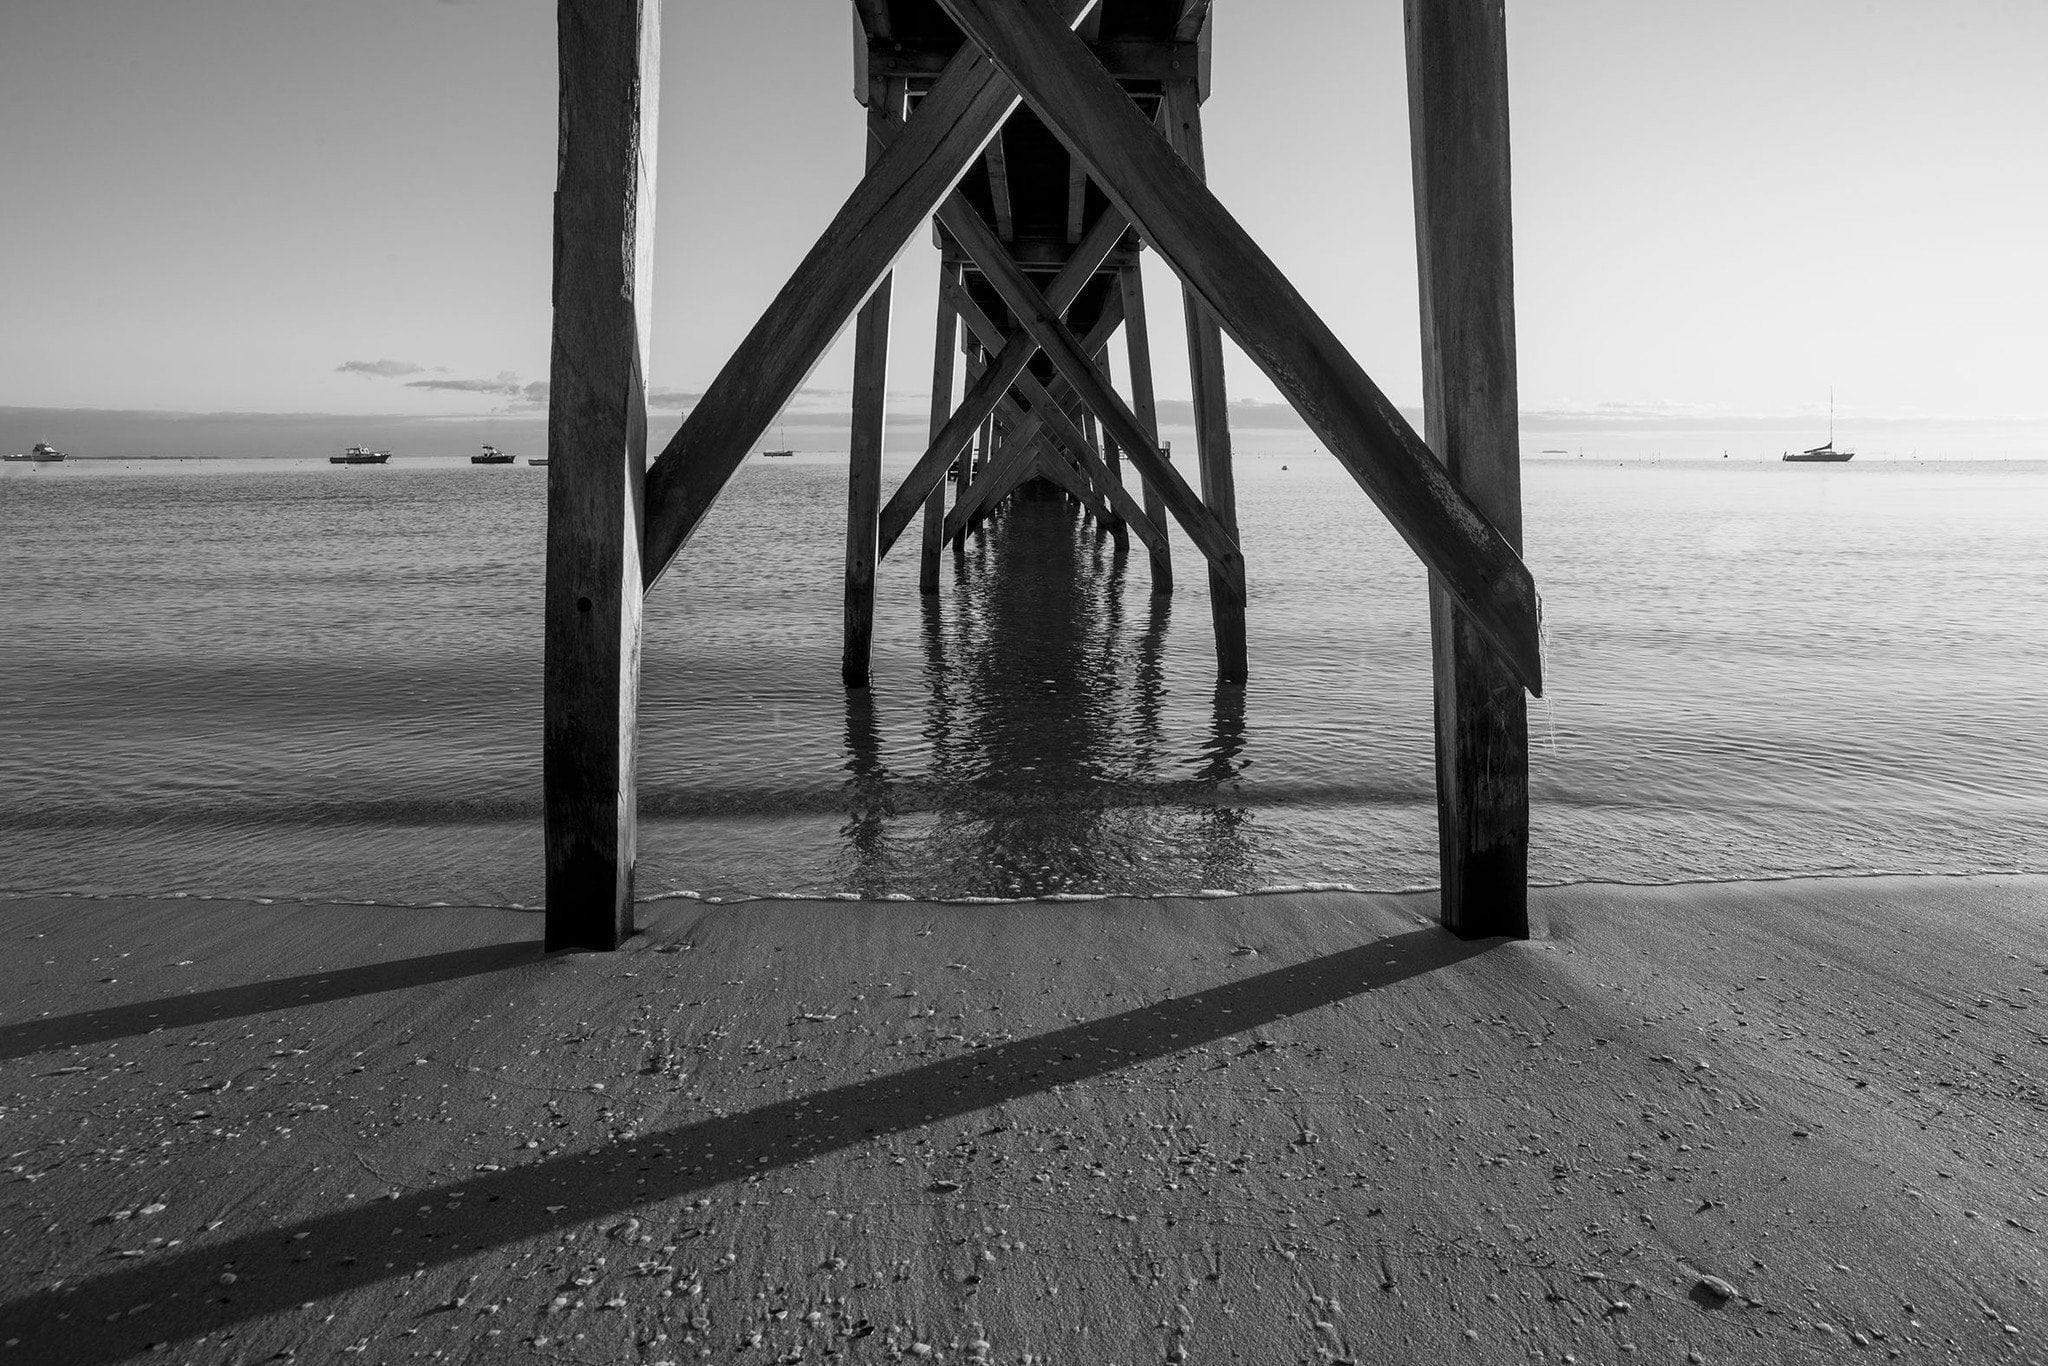 From the down capture of a wooden bridge on the beach, Sorrento Couta Boat Club pier, underneath